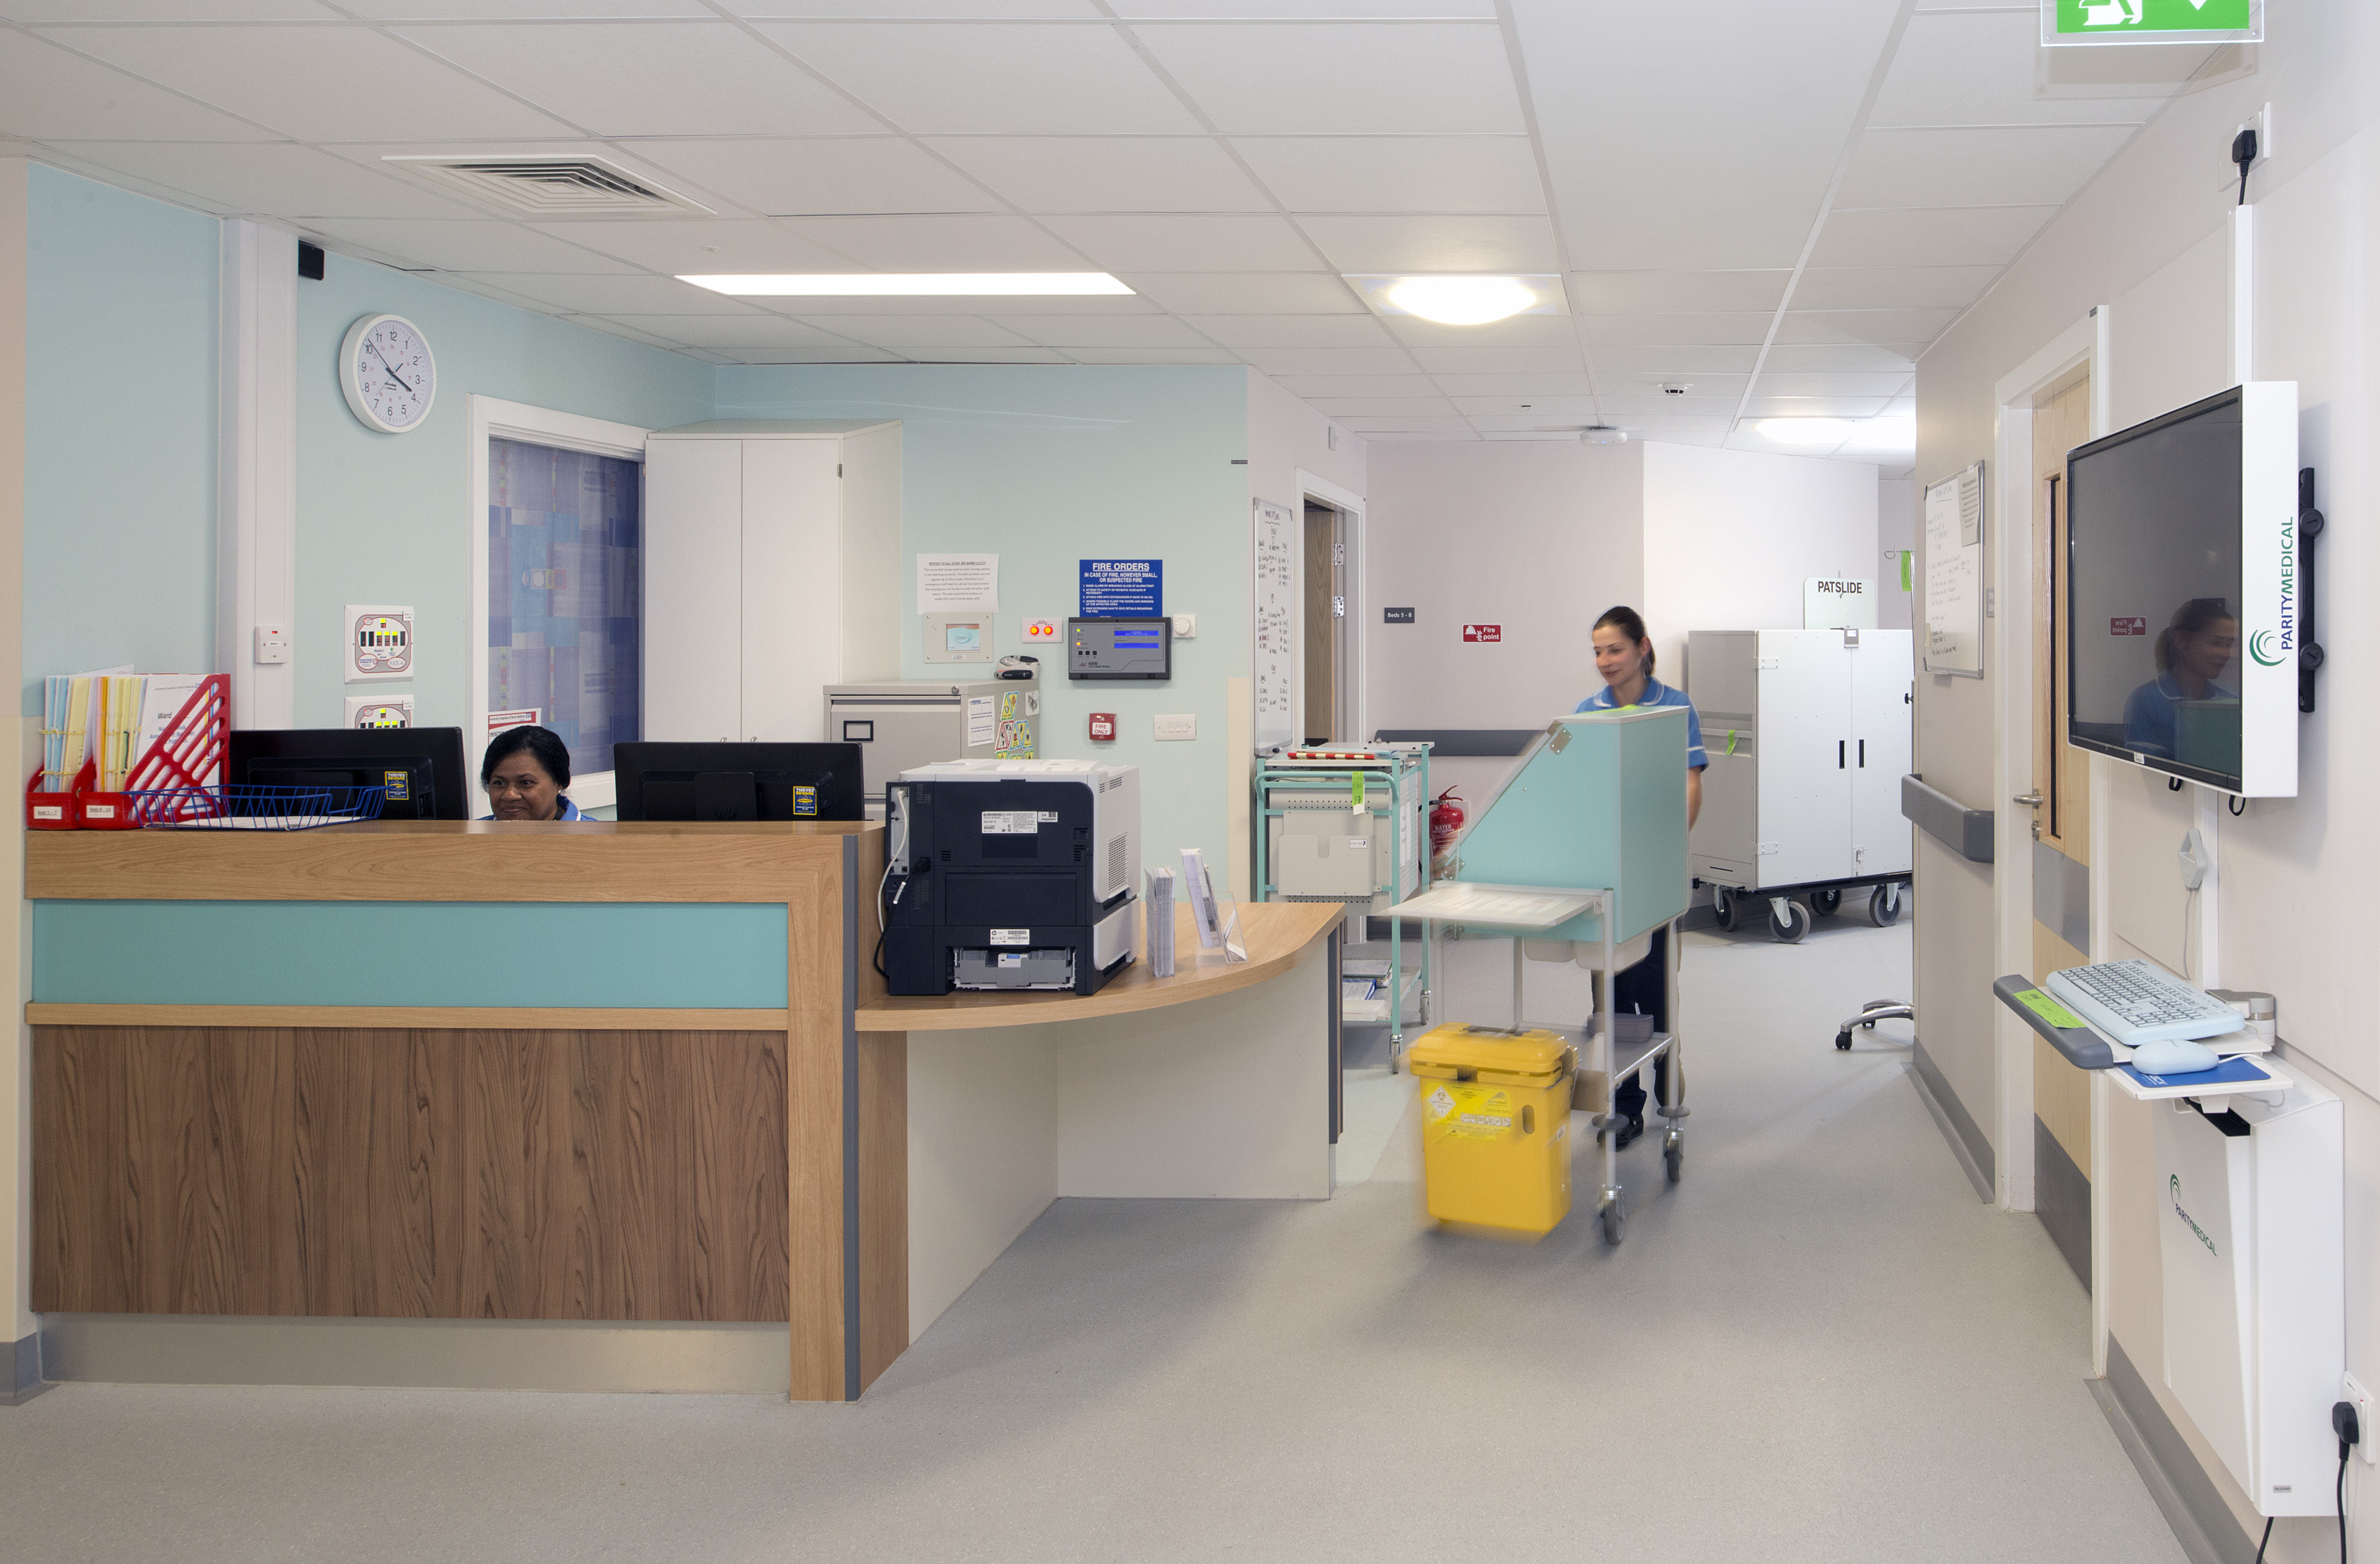 Kier Group and Gilling Dod Architects were highly commended in the Innovation in ProCure21 Plus category for integrating health services at the Royal Stoke University Hospital